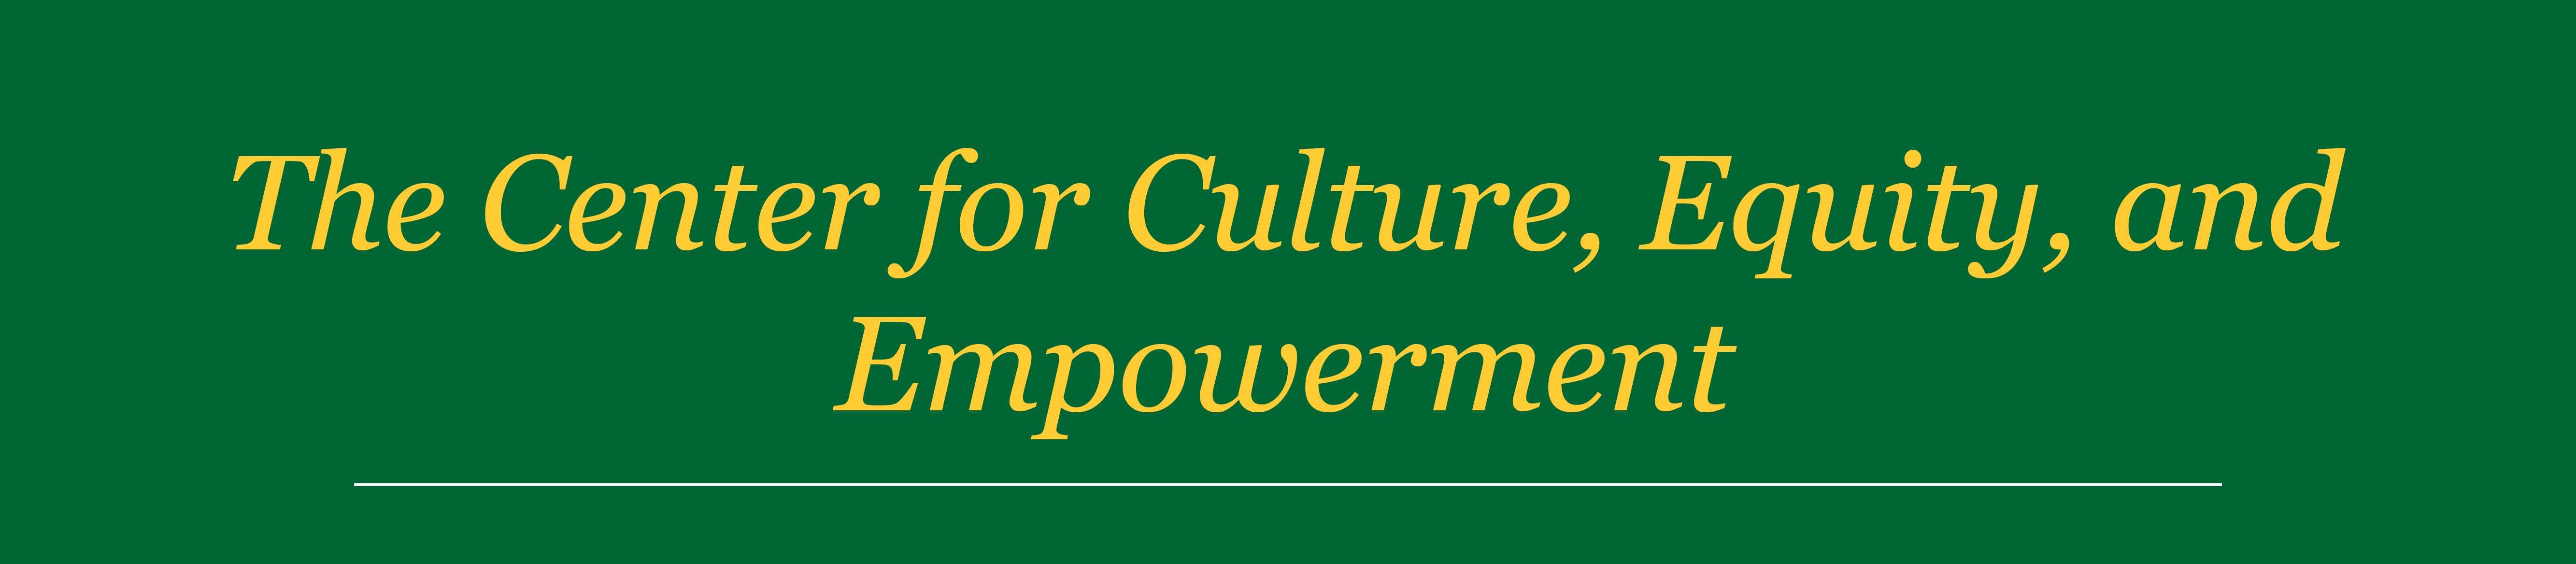 The Center for Culture, Equity, and Empowerment header